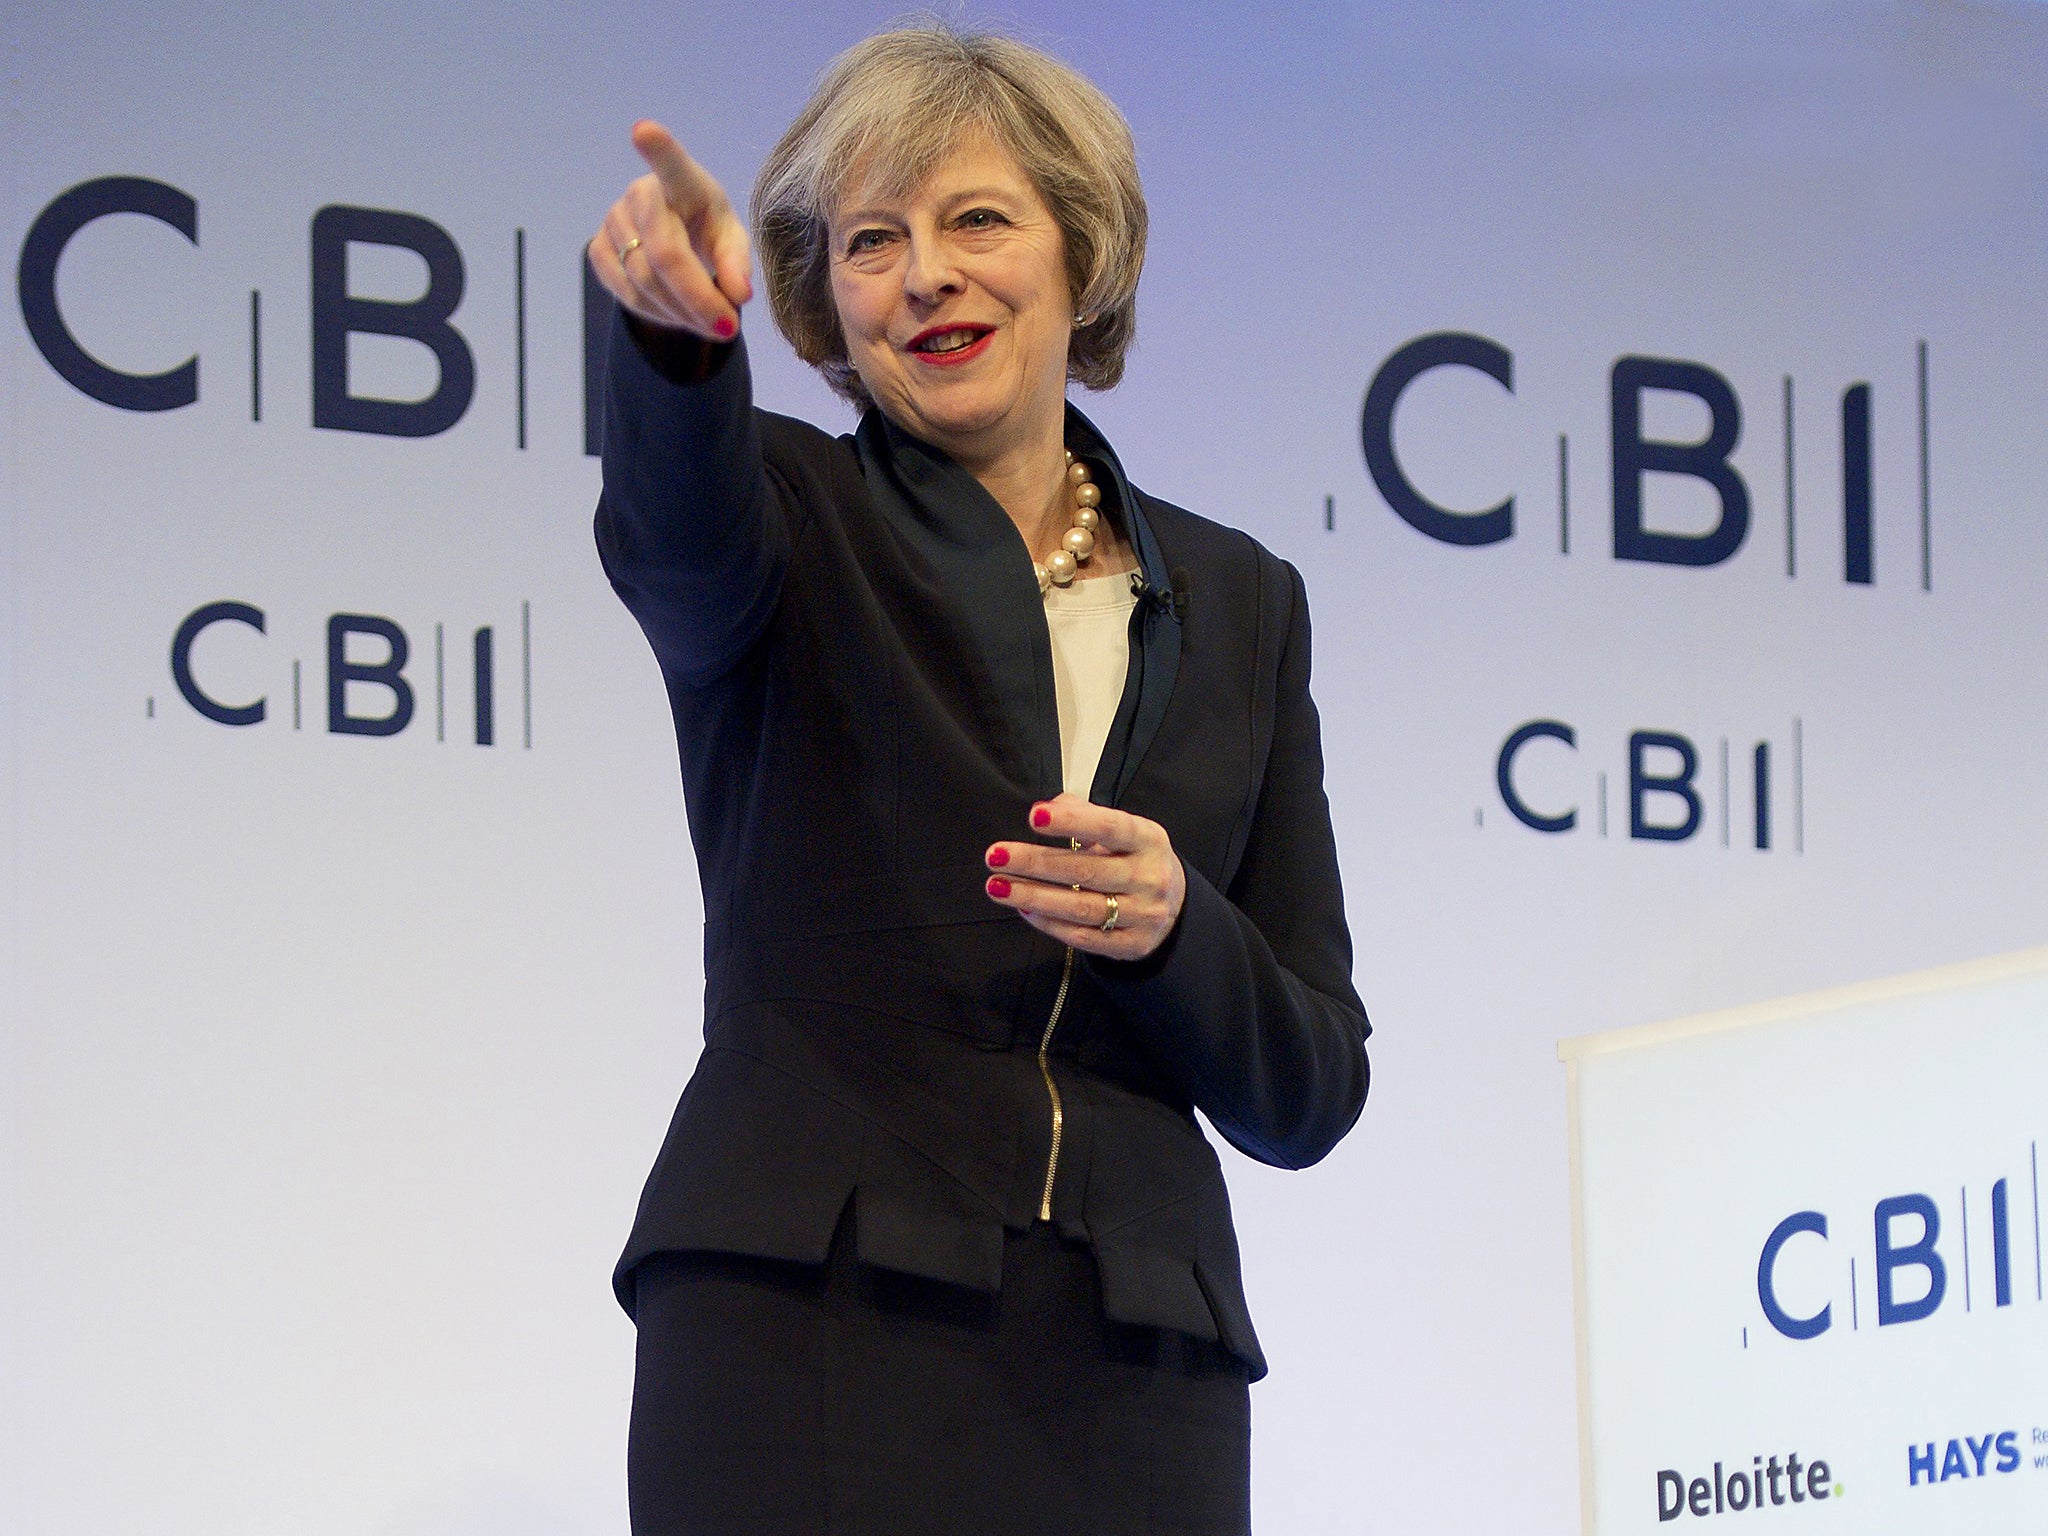 Theresa May addresses delegates at the annual CBI conference in central London